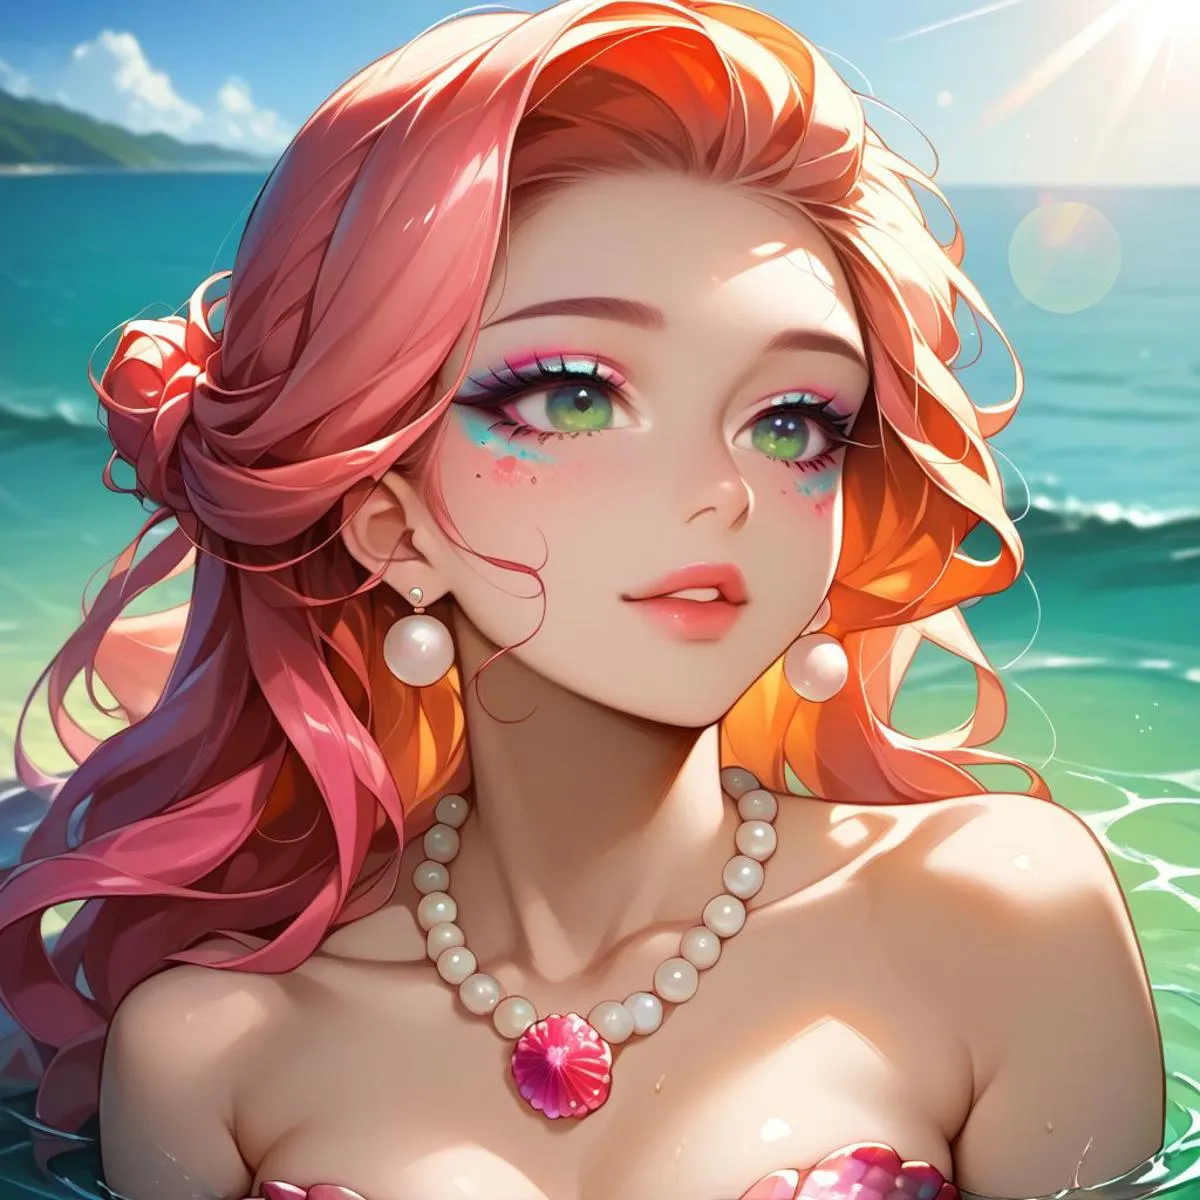 A vibrant anime-styled mermaid with pink hair and green eyes, wearing pearl jewelry, created by AI using Stable Diffusion.